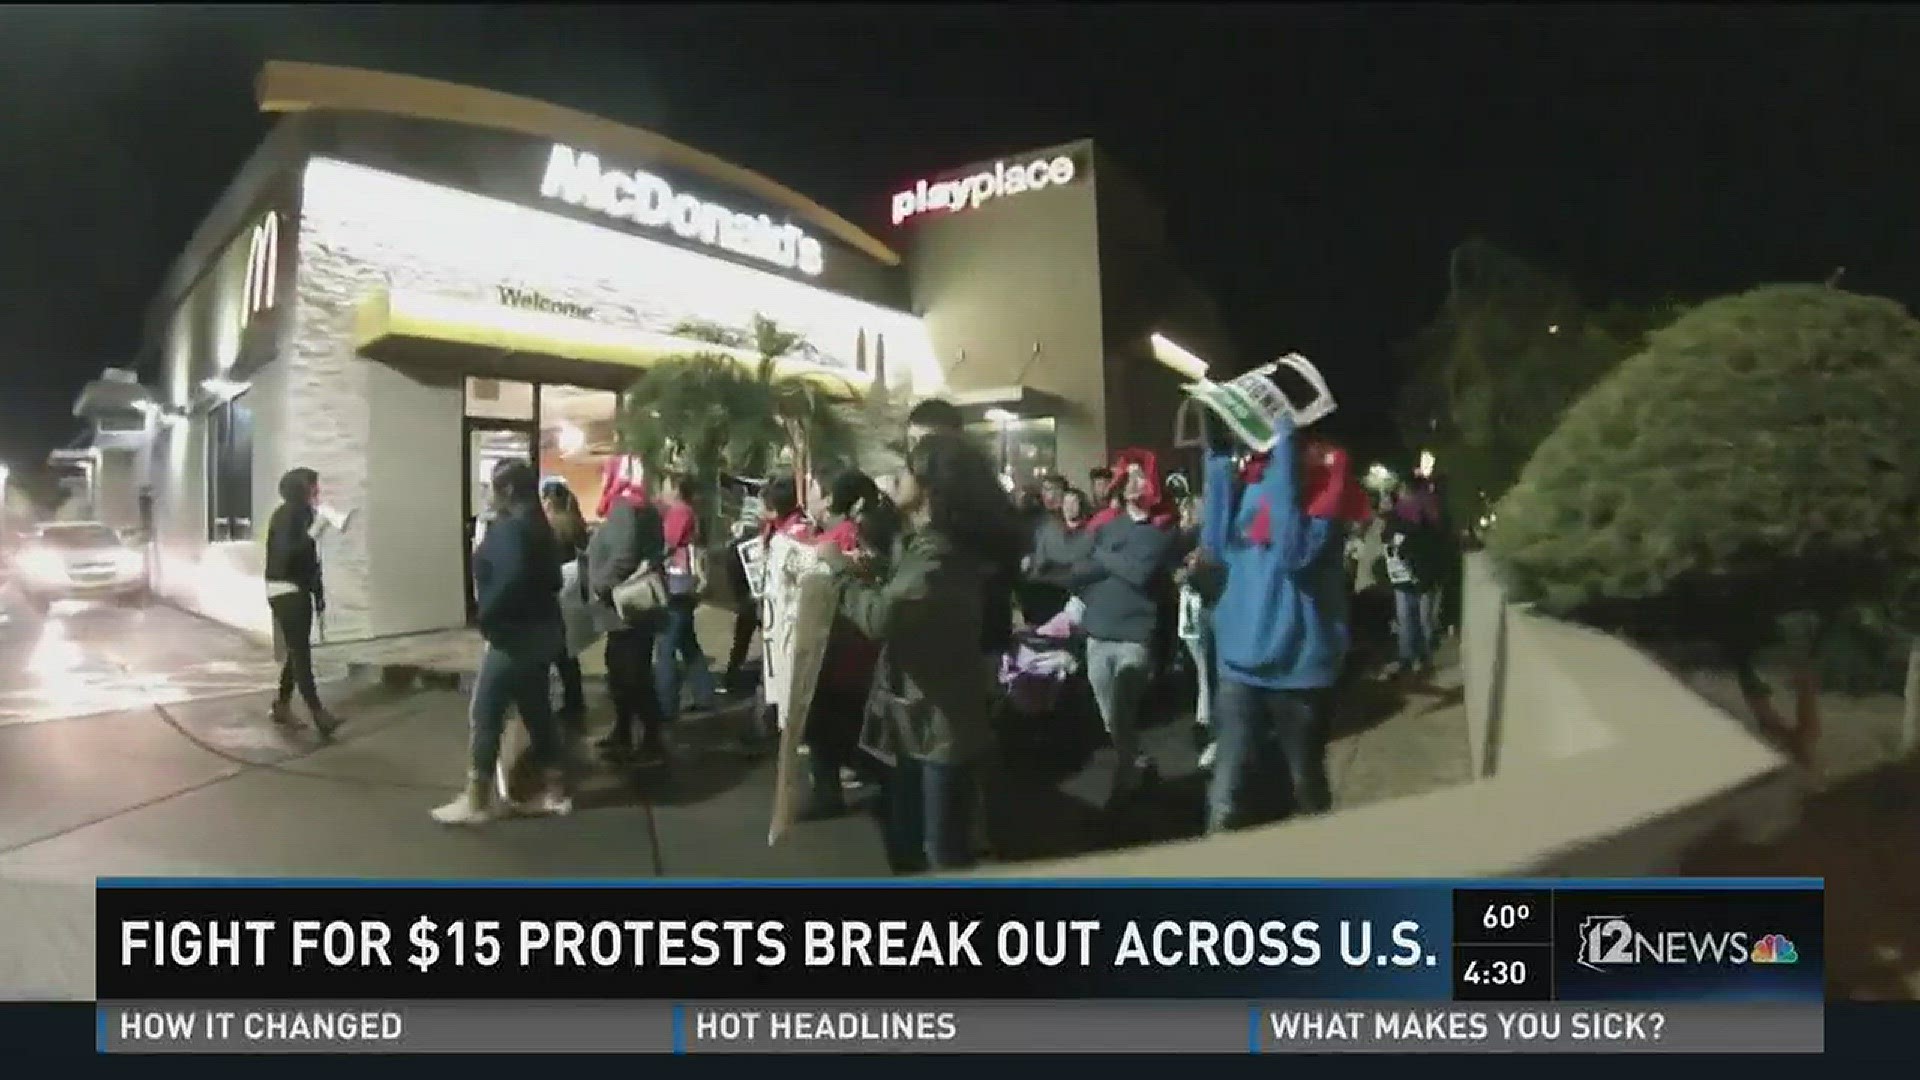 Over 130 cities from across the country take part in minimum wage protests.